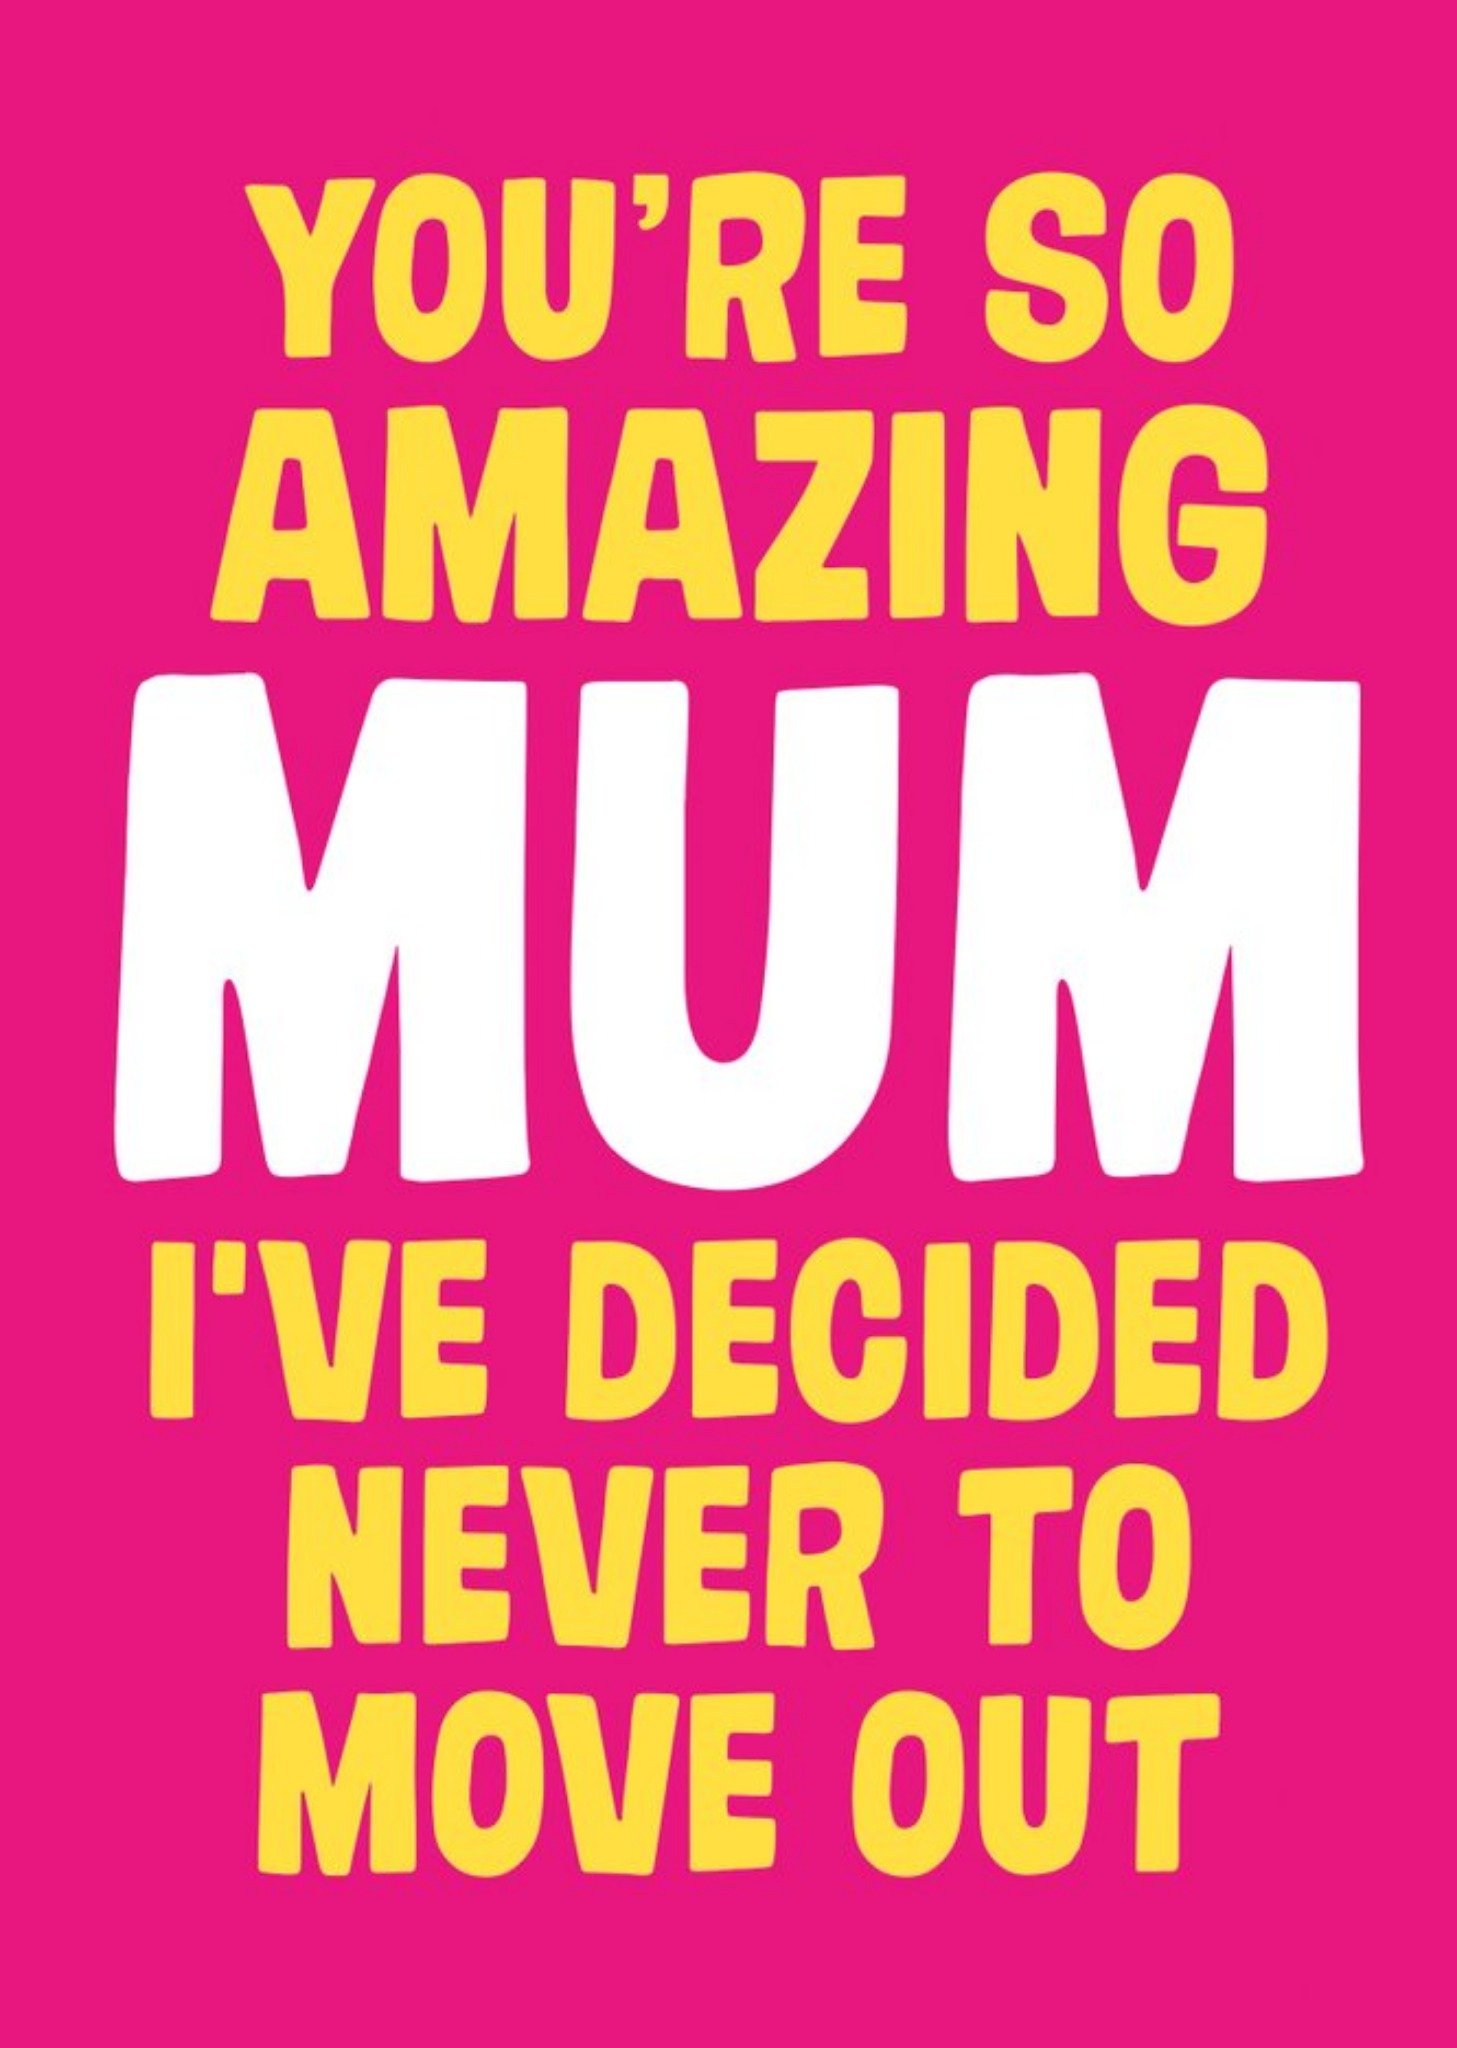 Moonpig Dean Morris You're So Amazing Mum Mother's Day Card Ecard